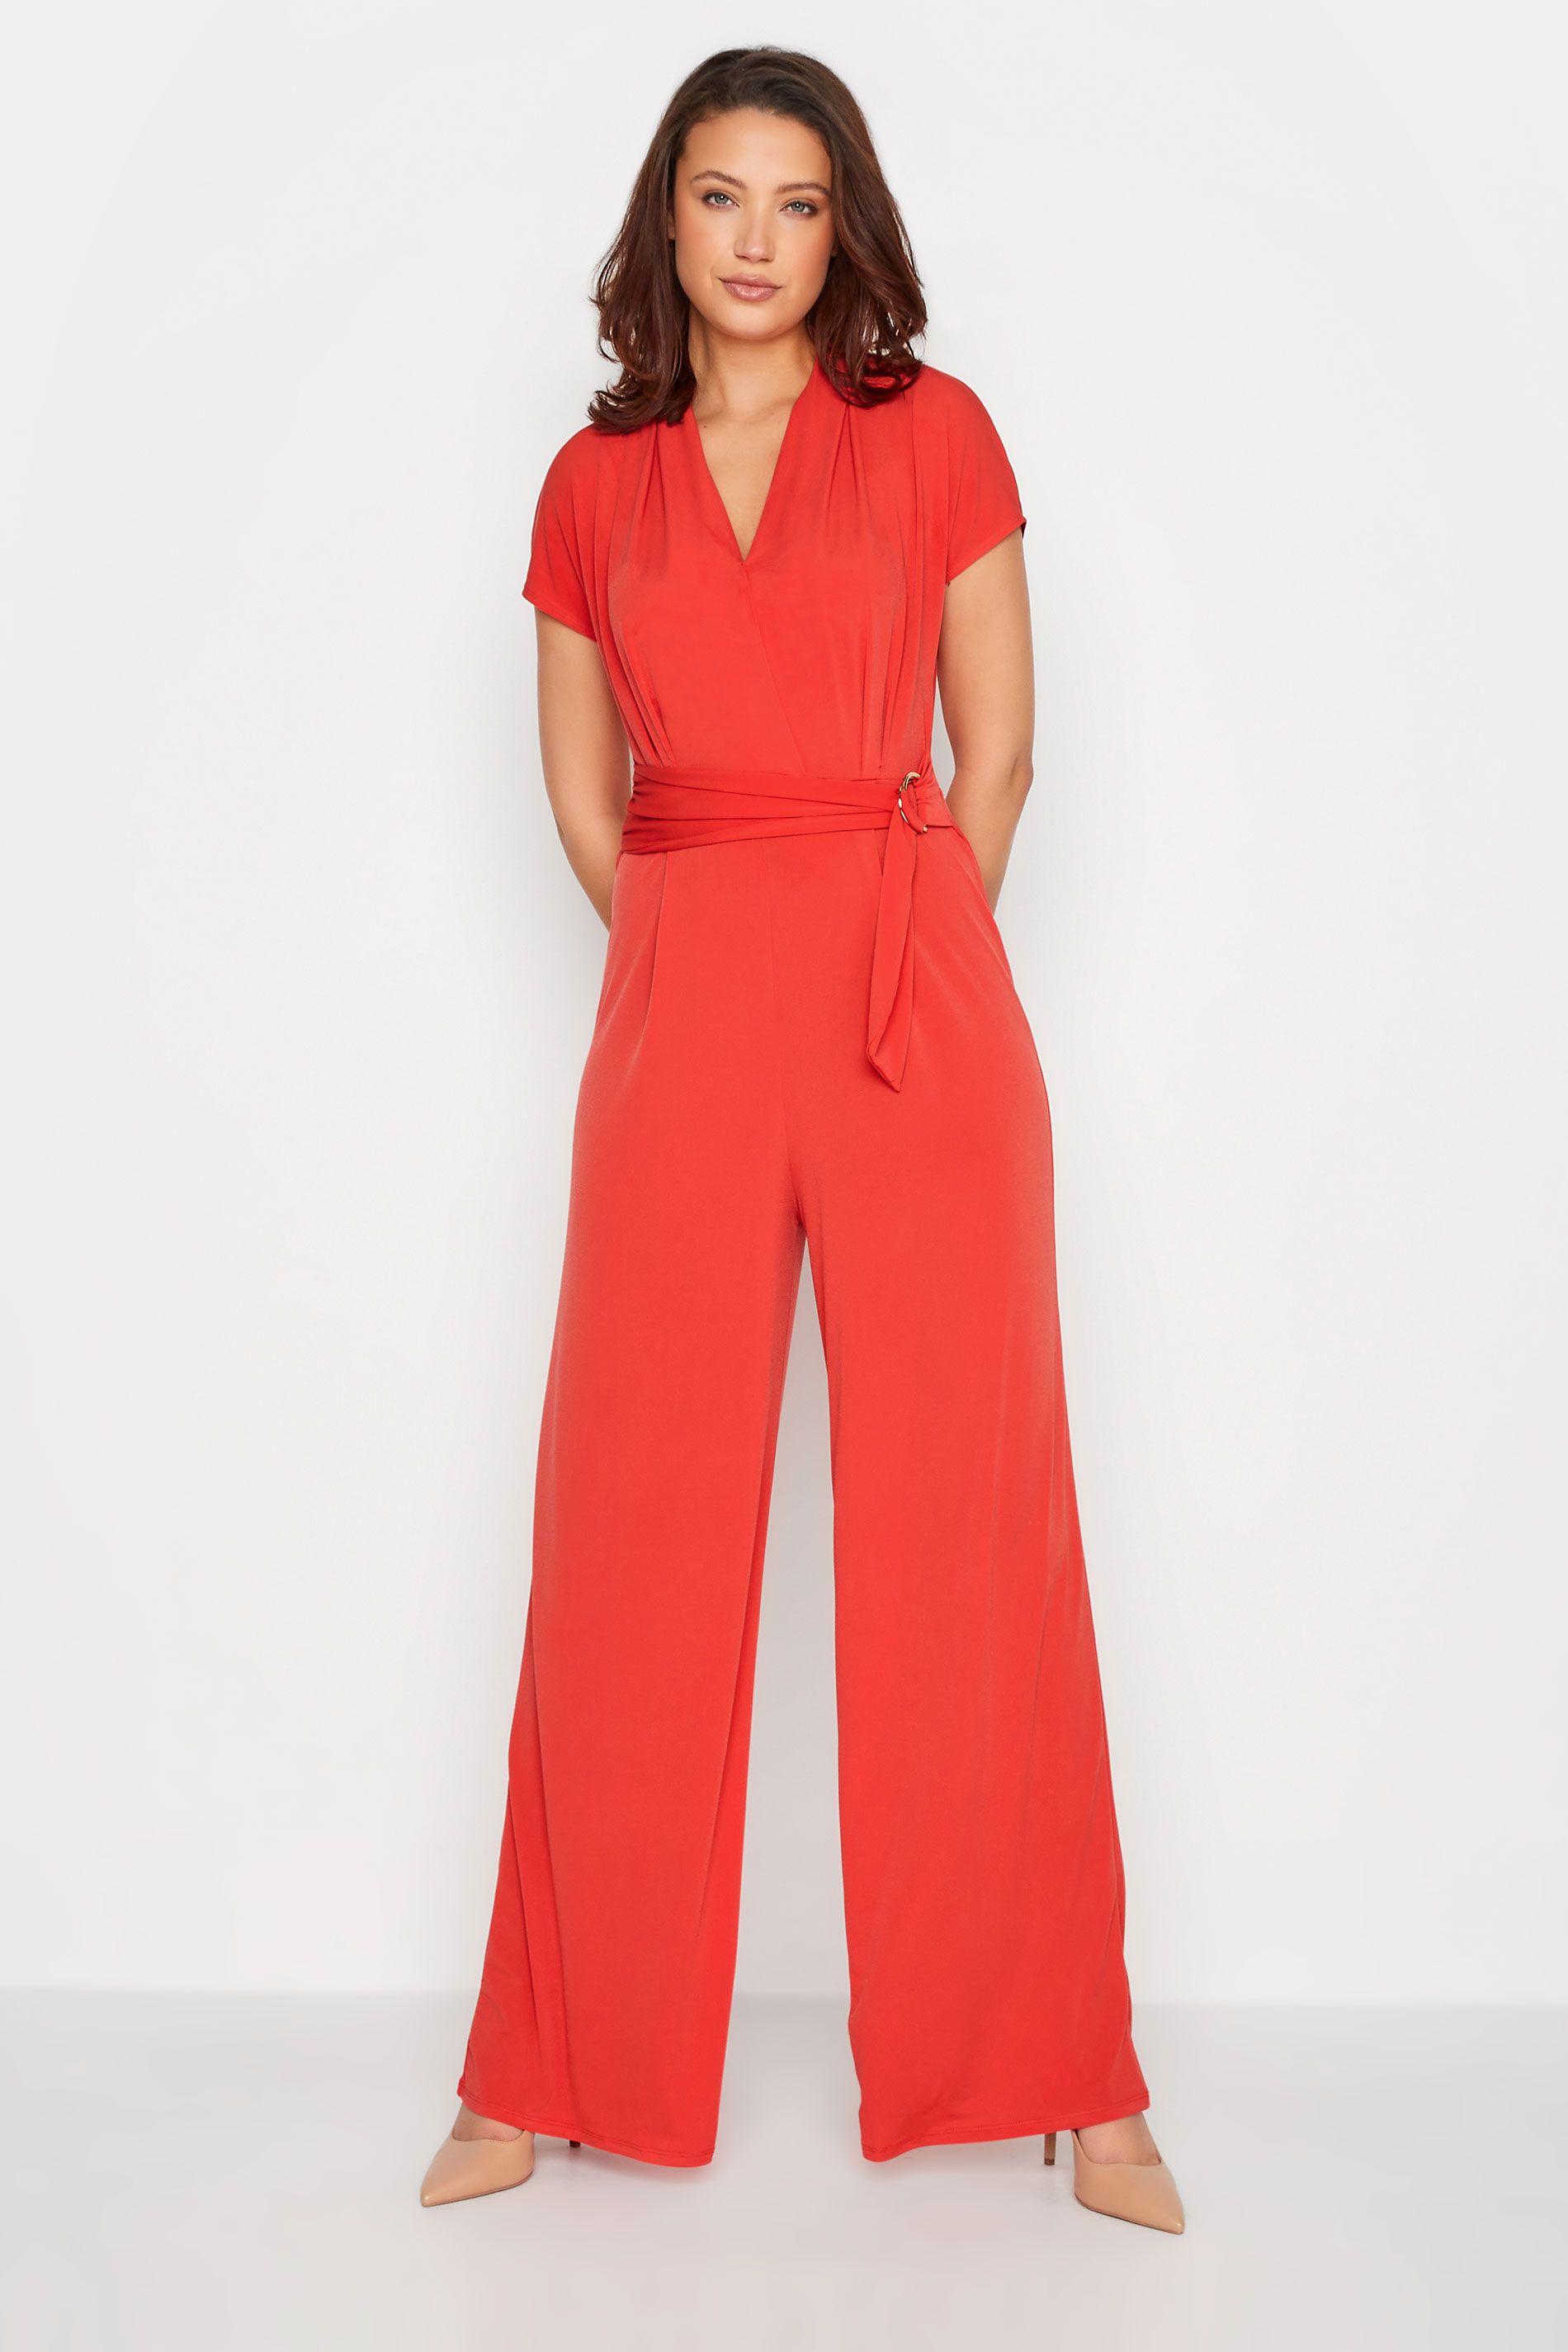 LTS Tall Coral Orange Wrap Stretch Jumpsuit | Long Tall Sally